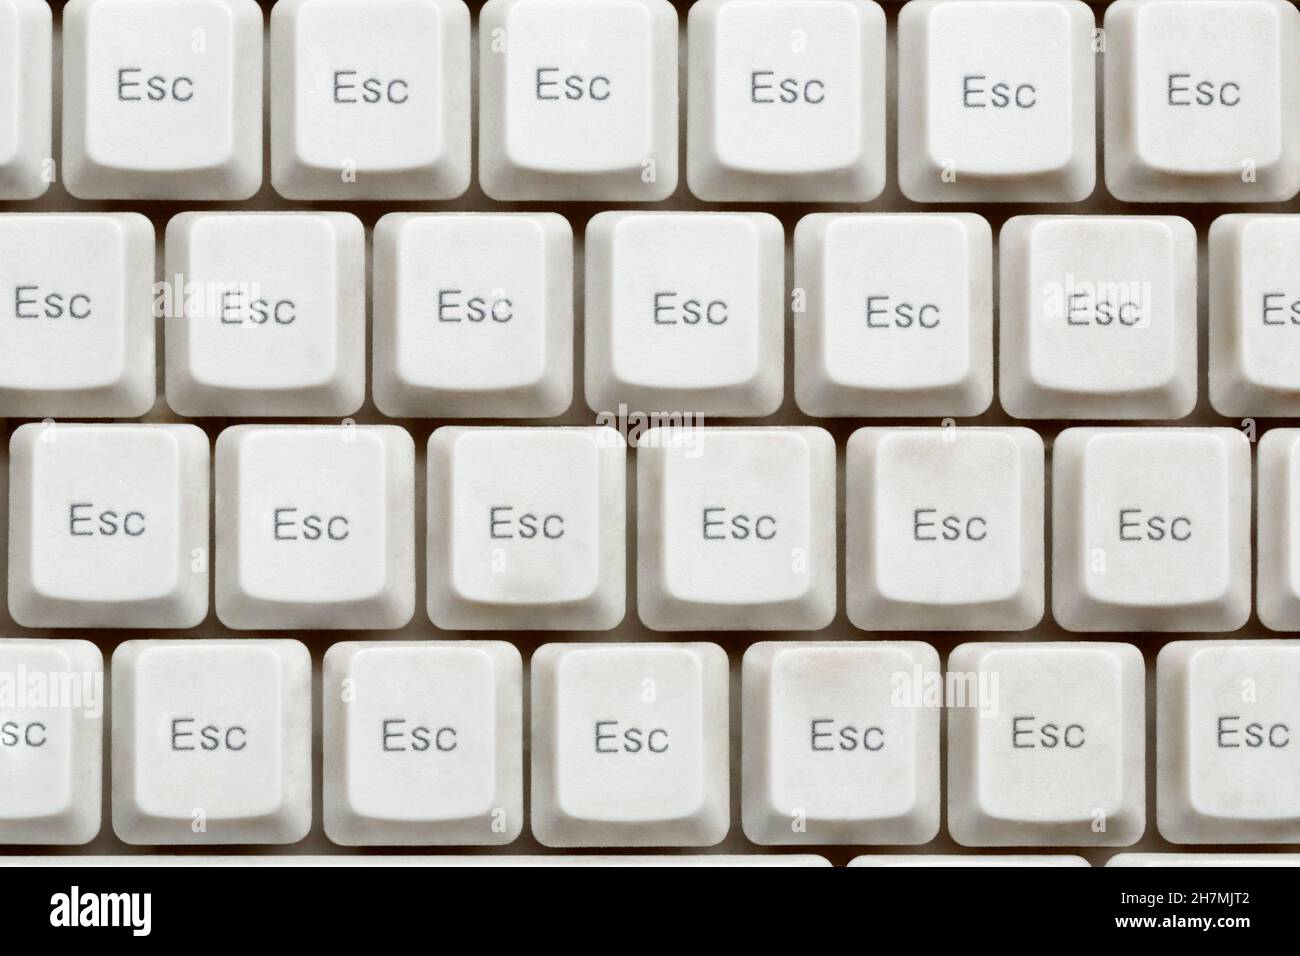 Close up escape keys on computer keyboard Stock Photo